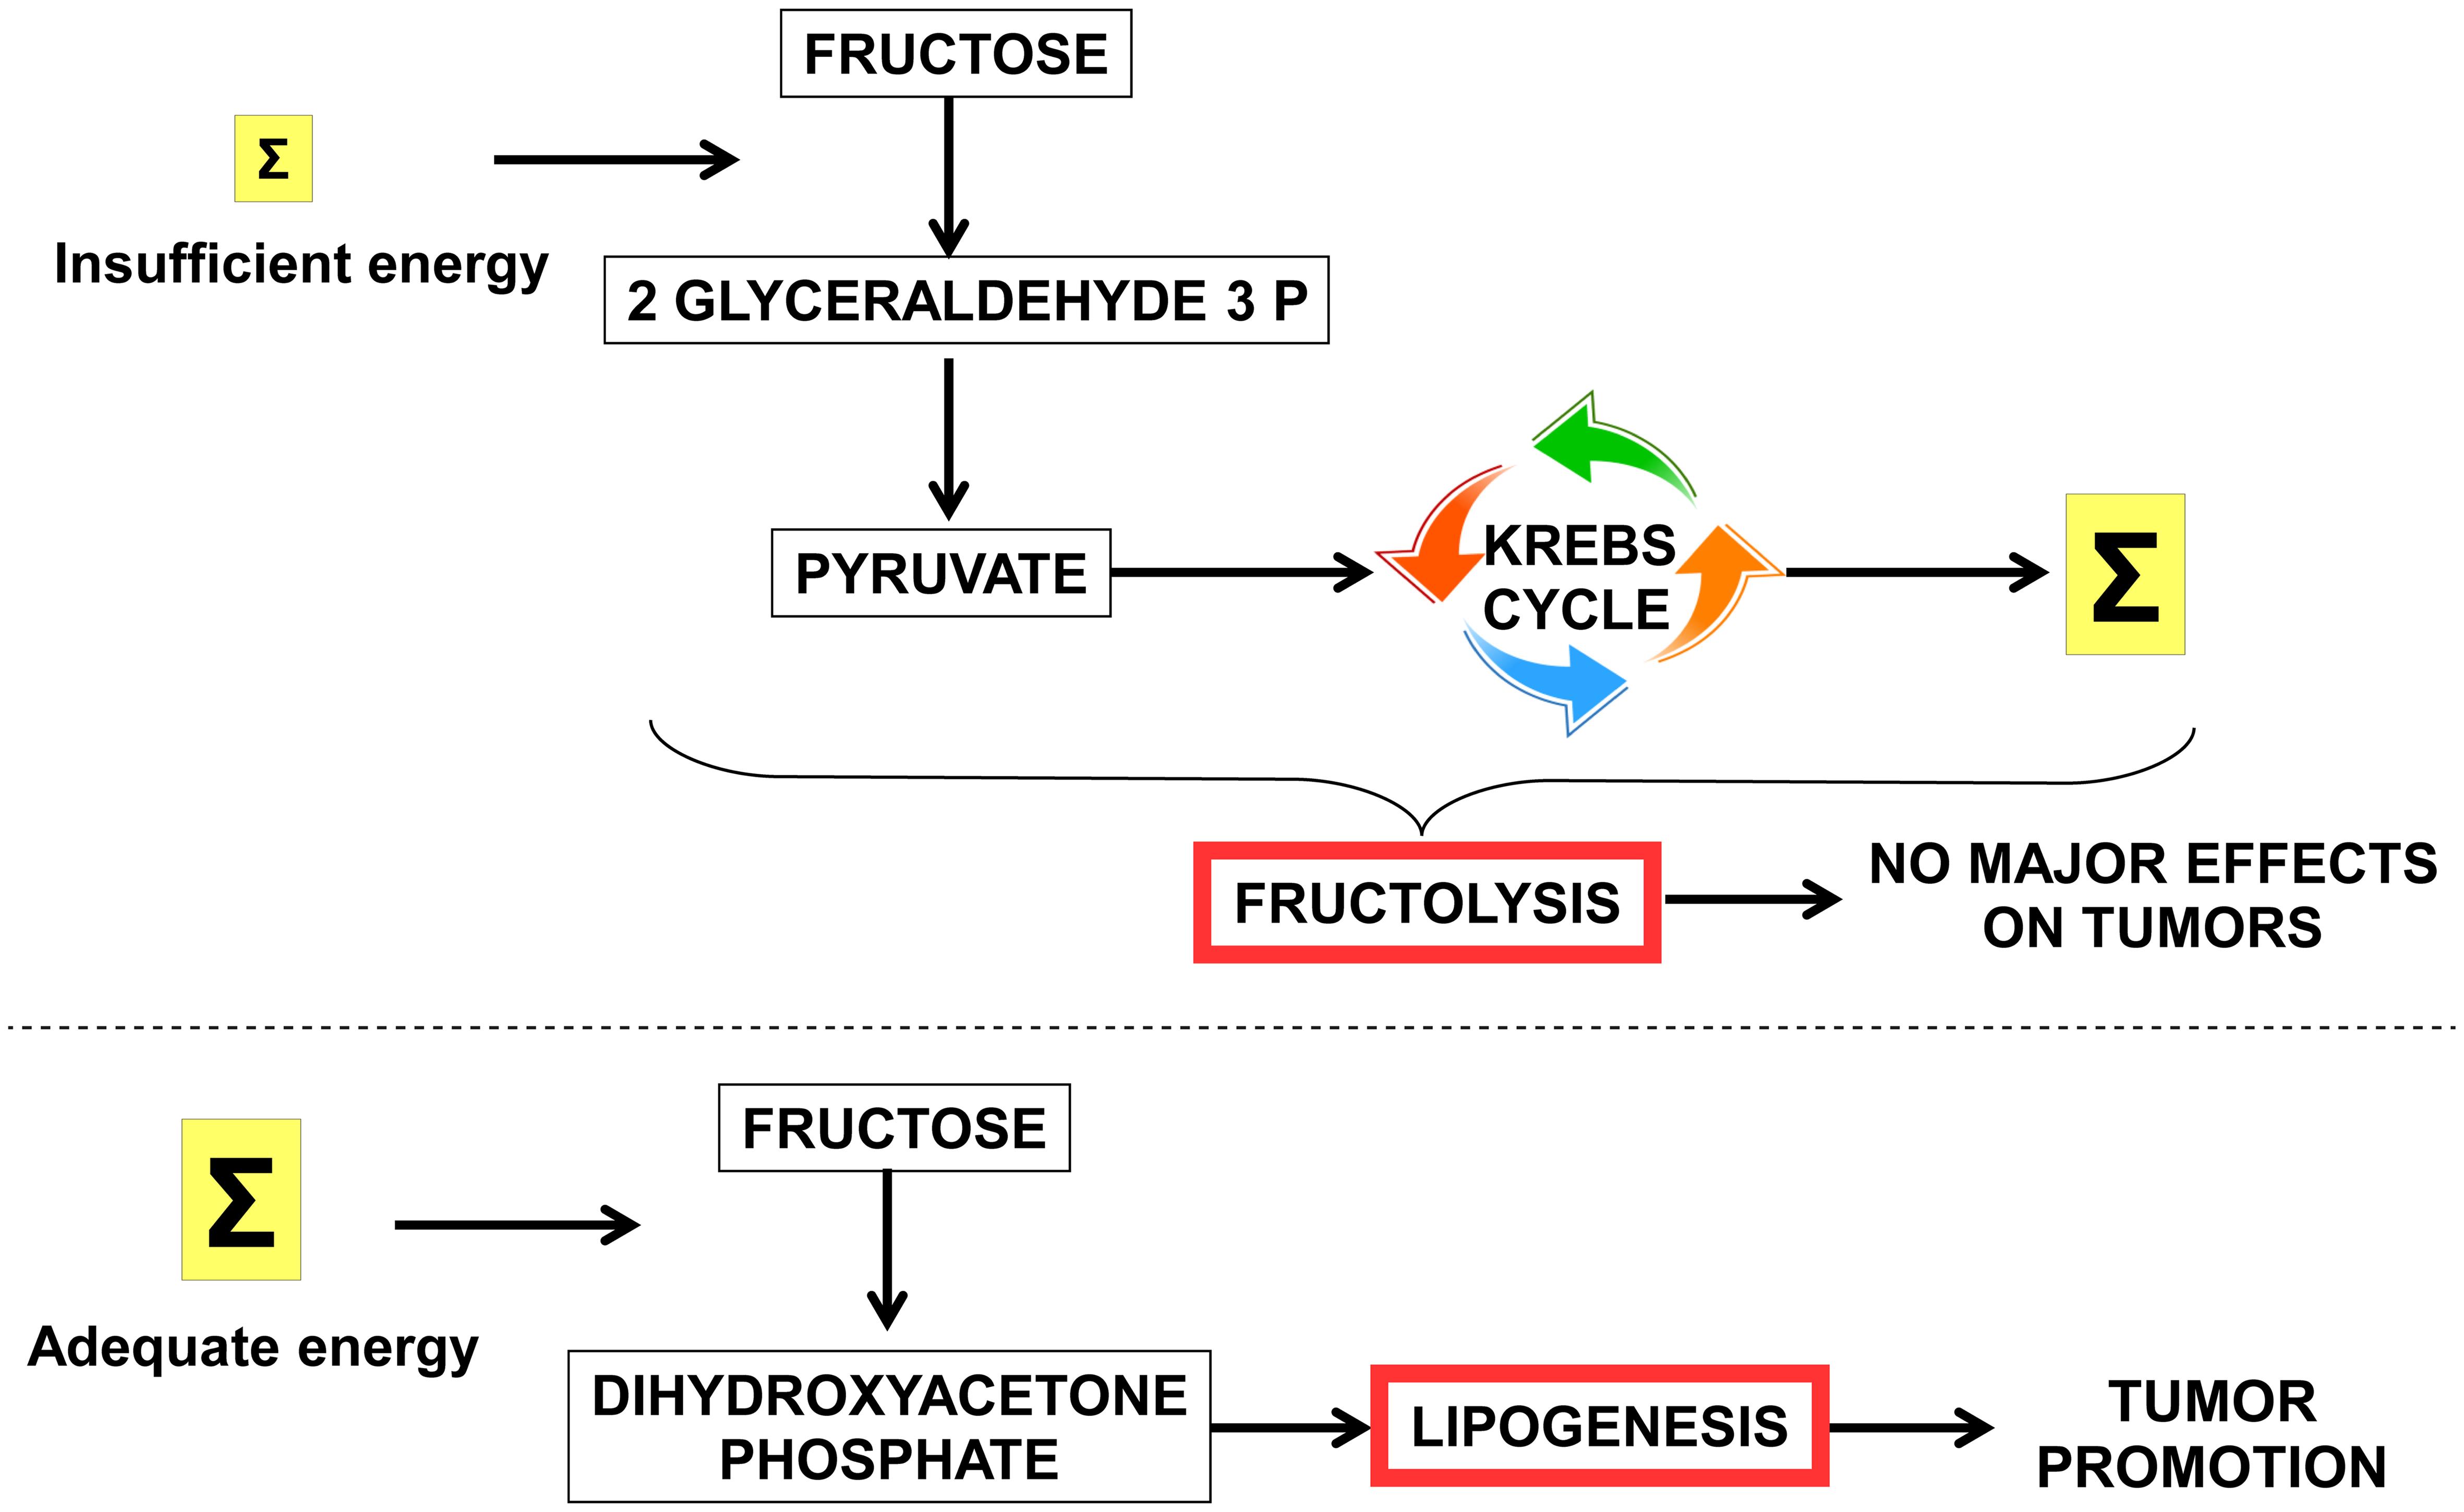 Context-dependent metabolism of fructose.